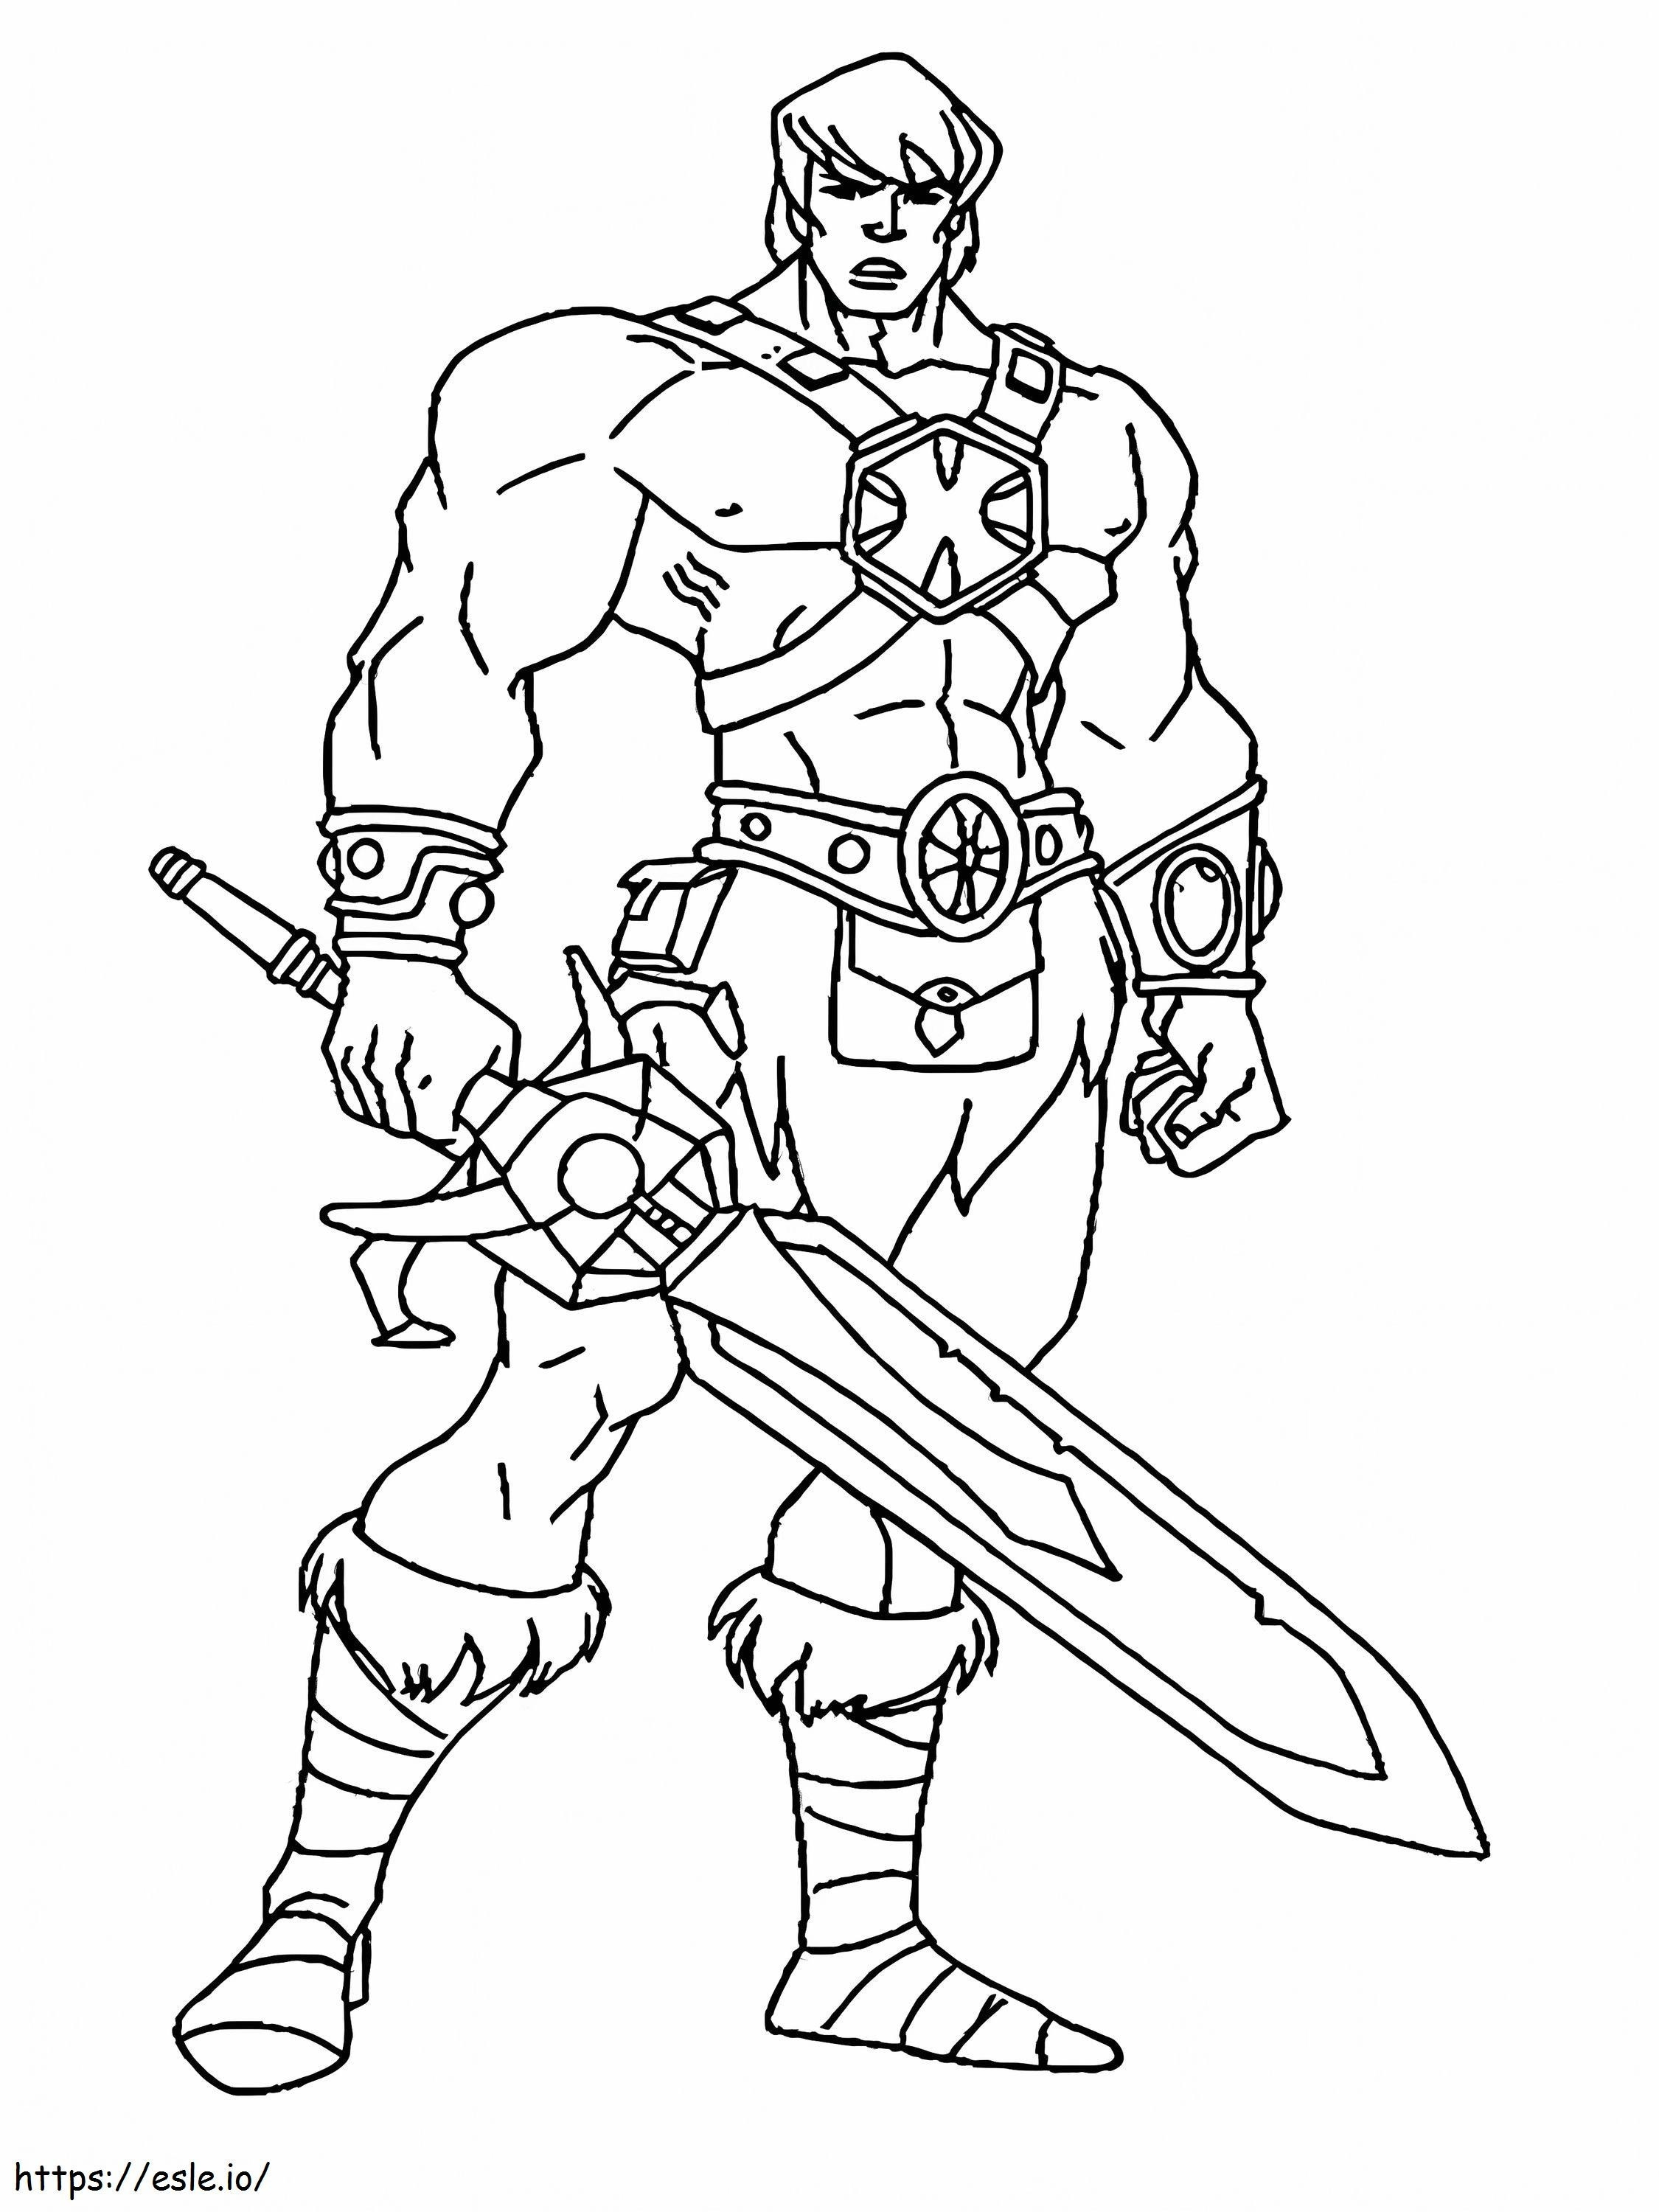 He Man With Sword coloring page